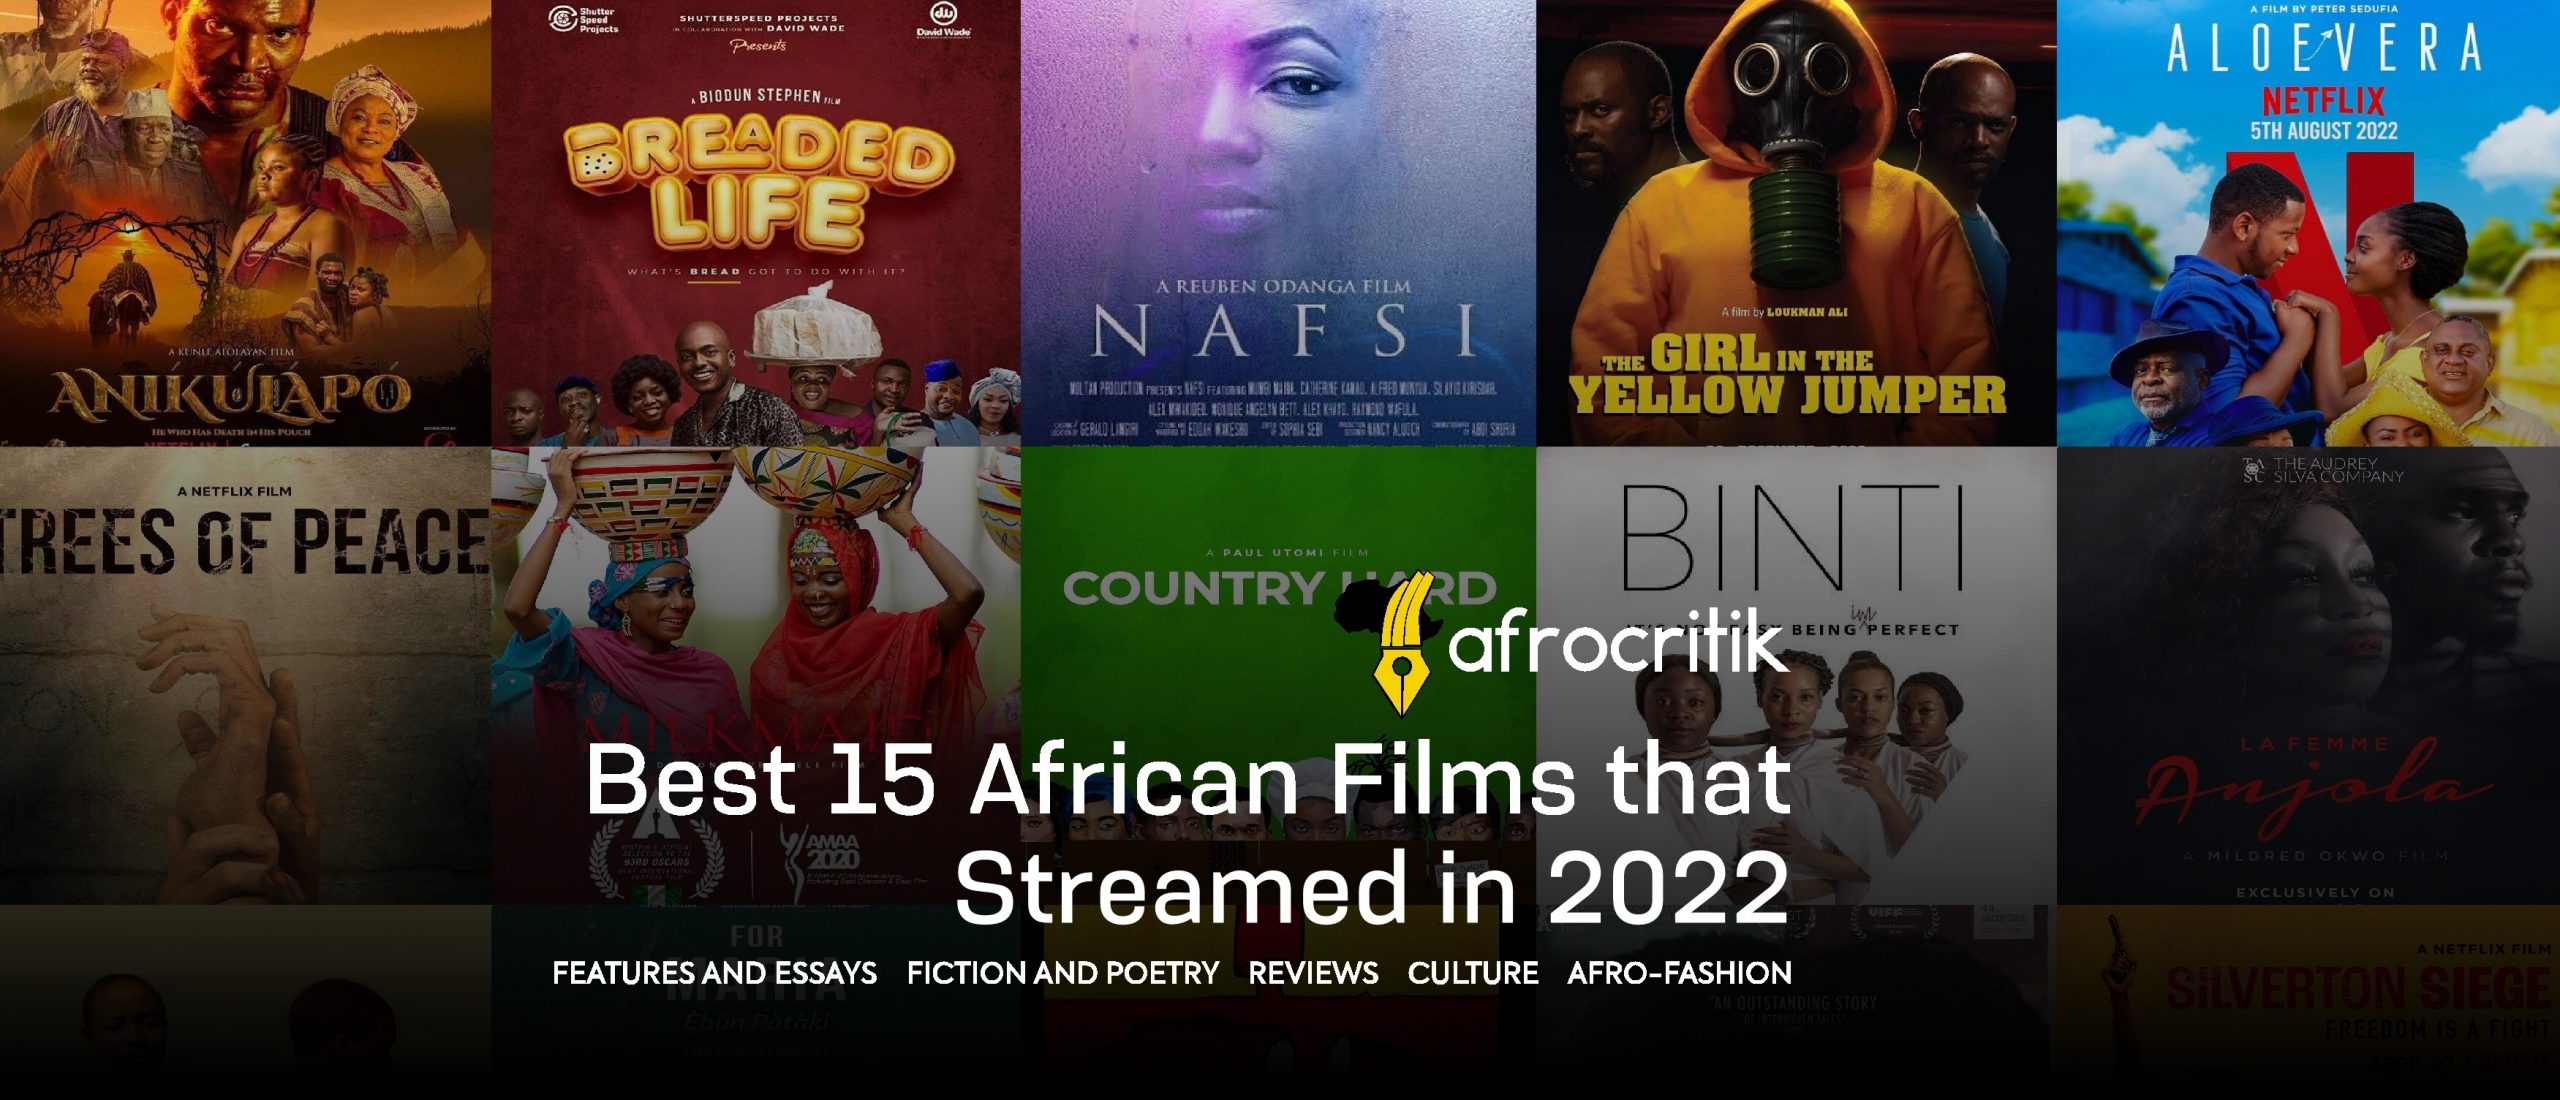 Afrocritik Best 15 African Films that Streamed in 2022